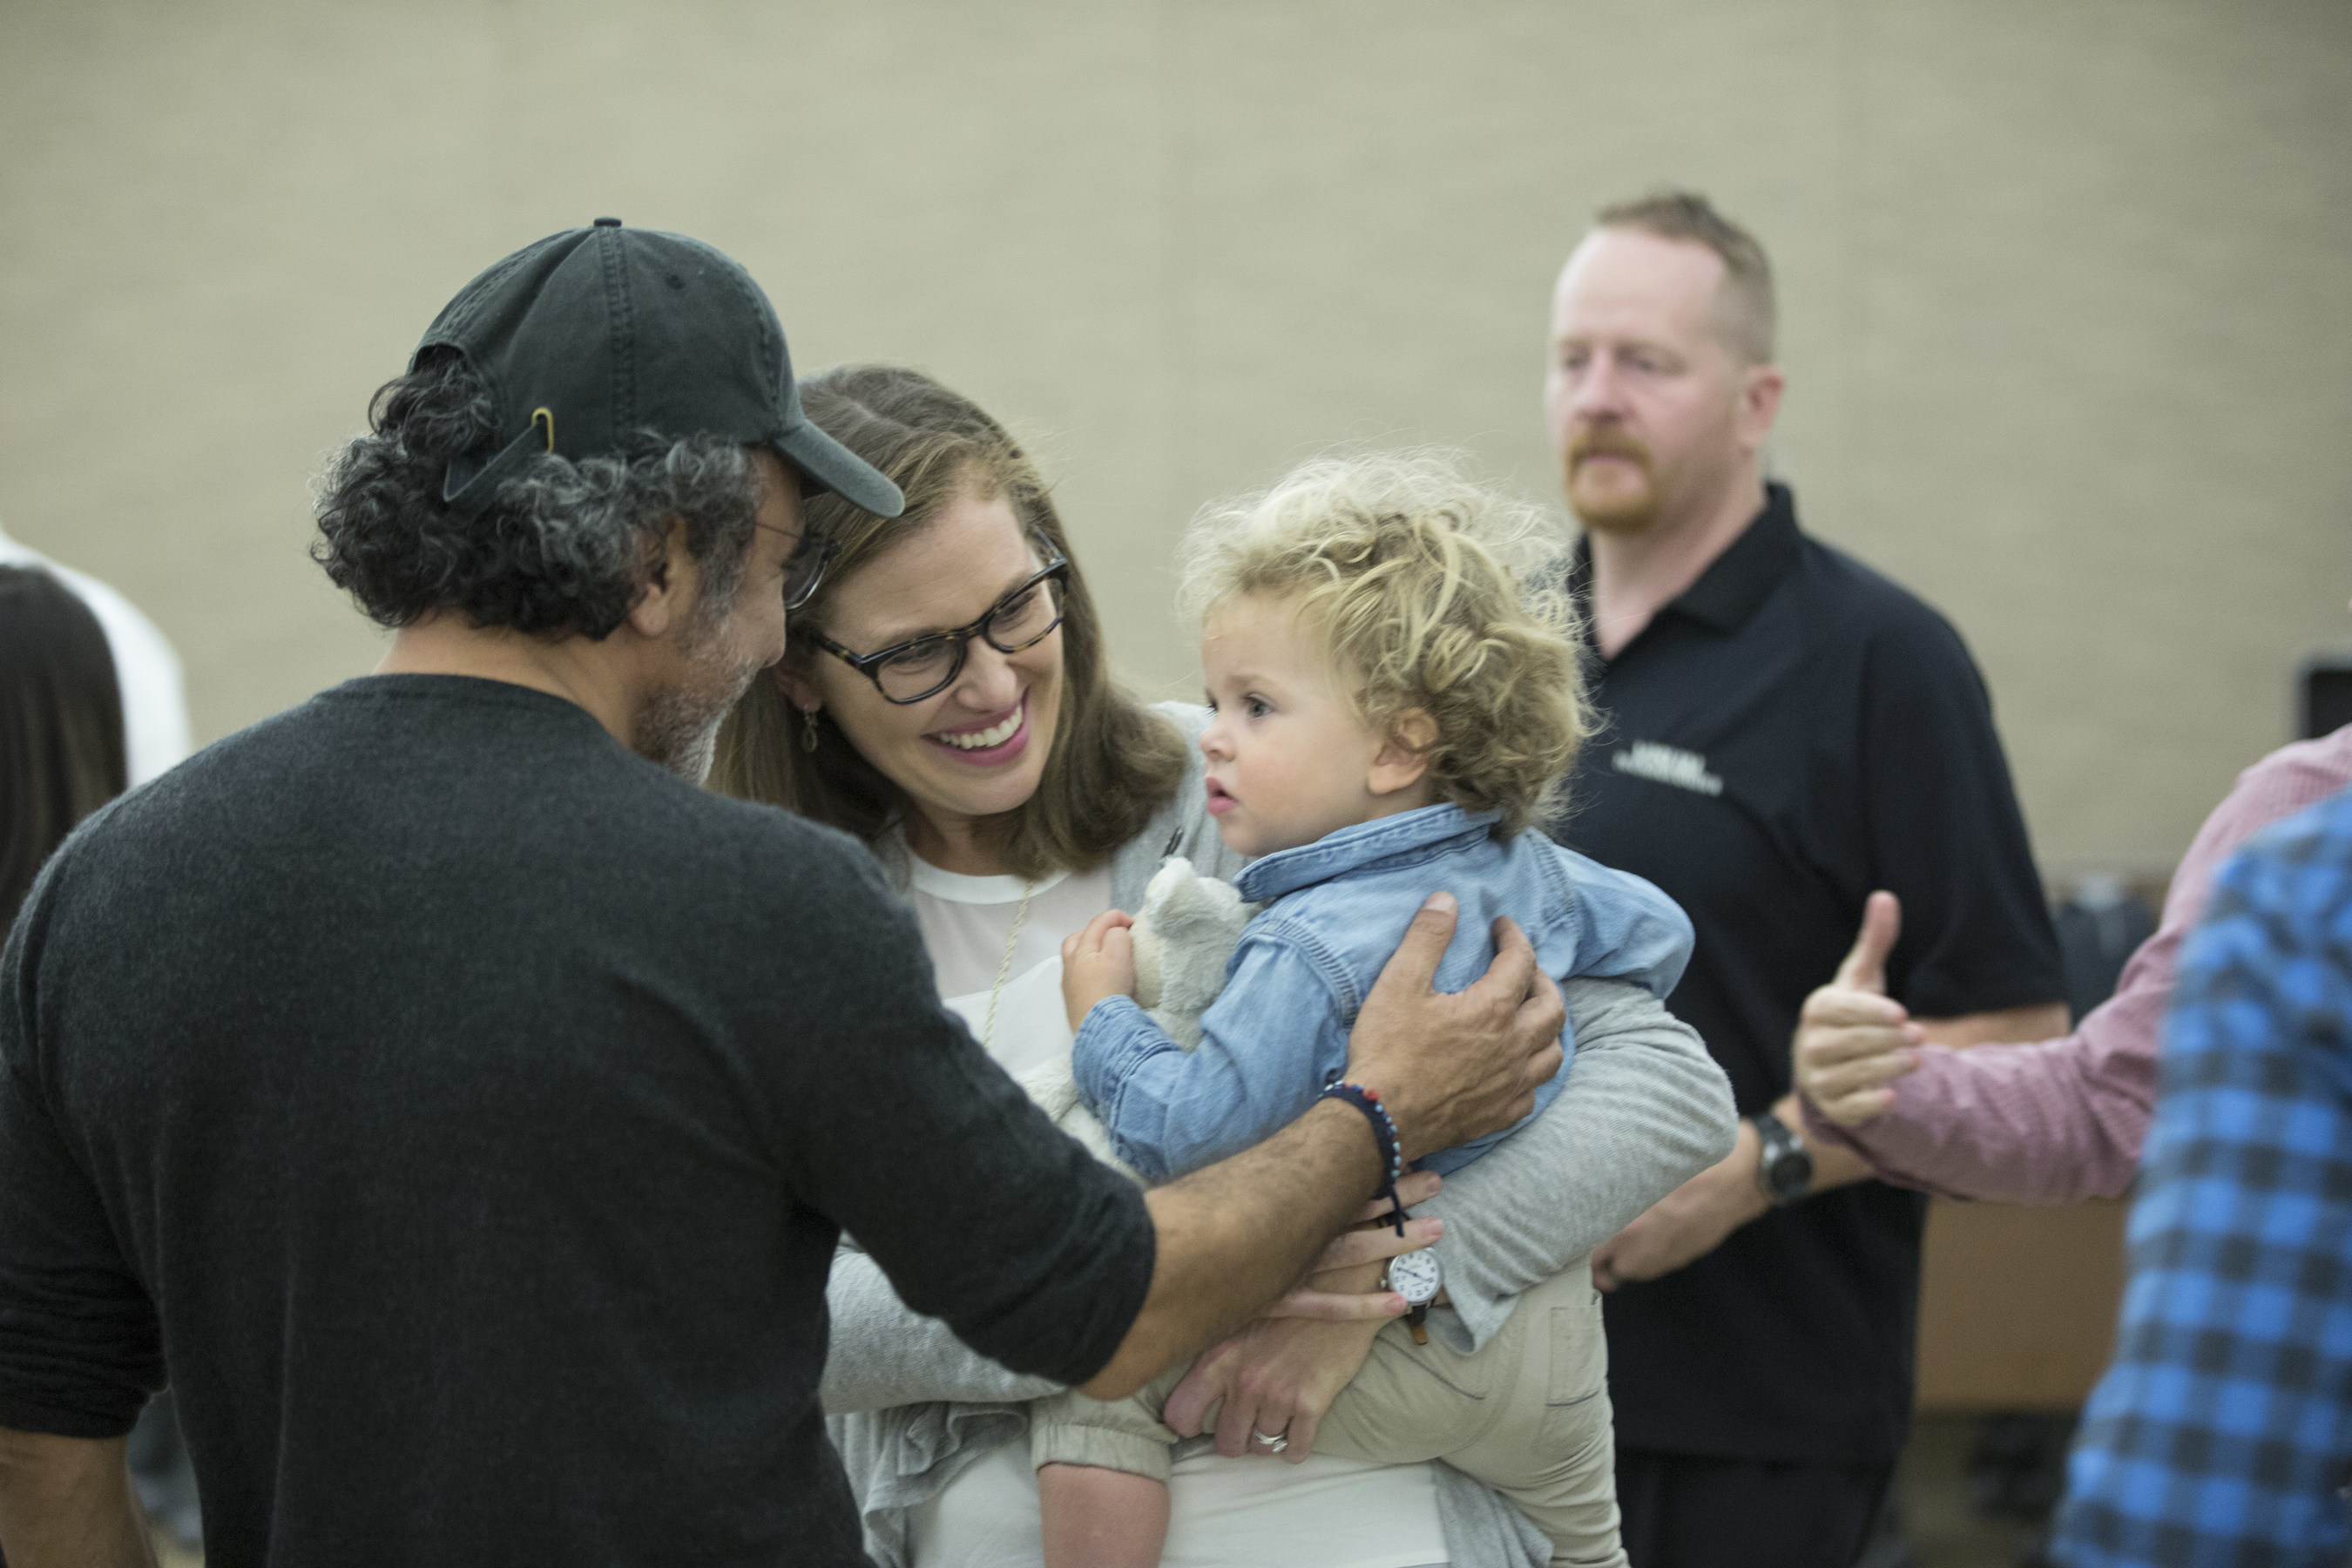 Chobani Receives Great Place to Work(R) Certification and Announces New Paid Parental Leave Policy Across the U.S.